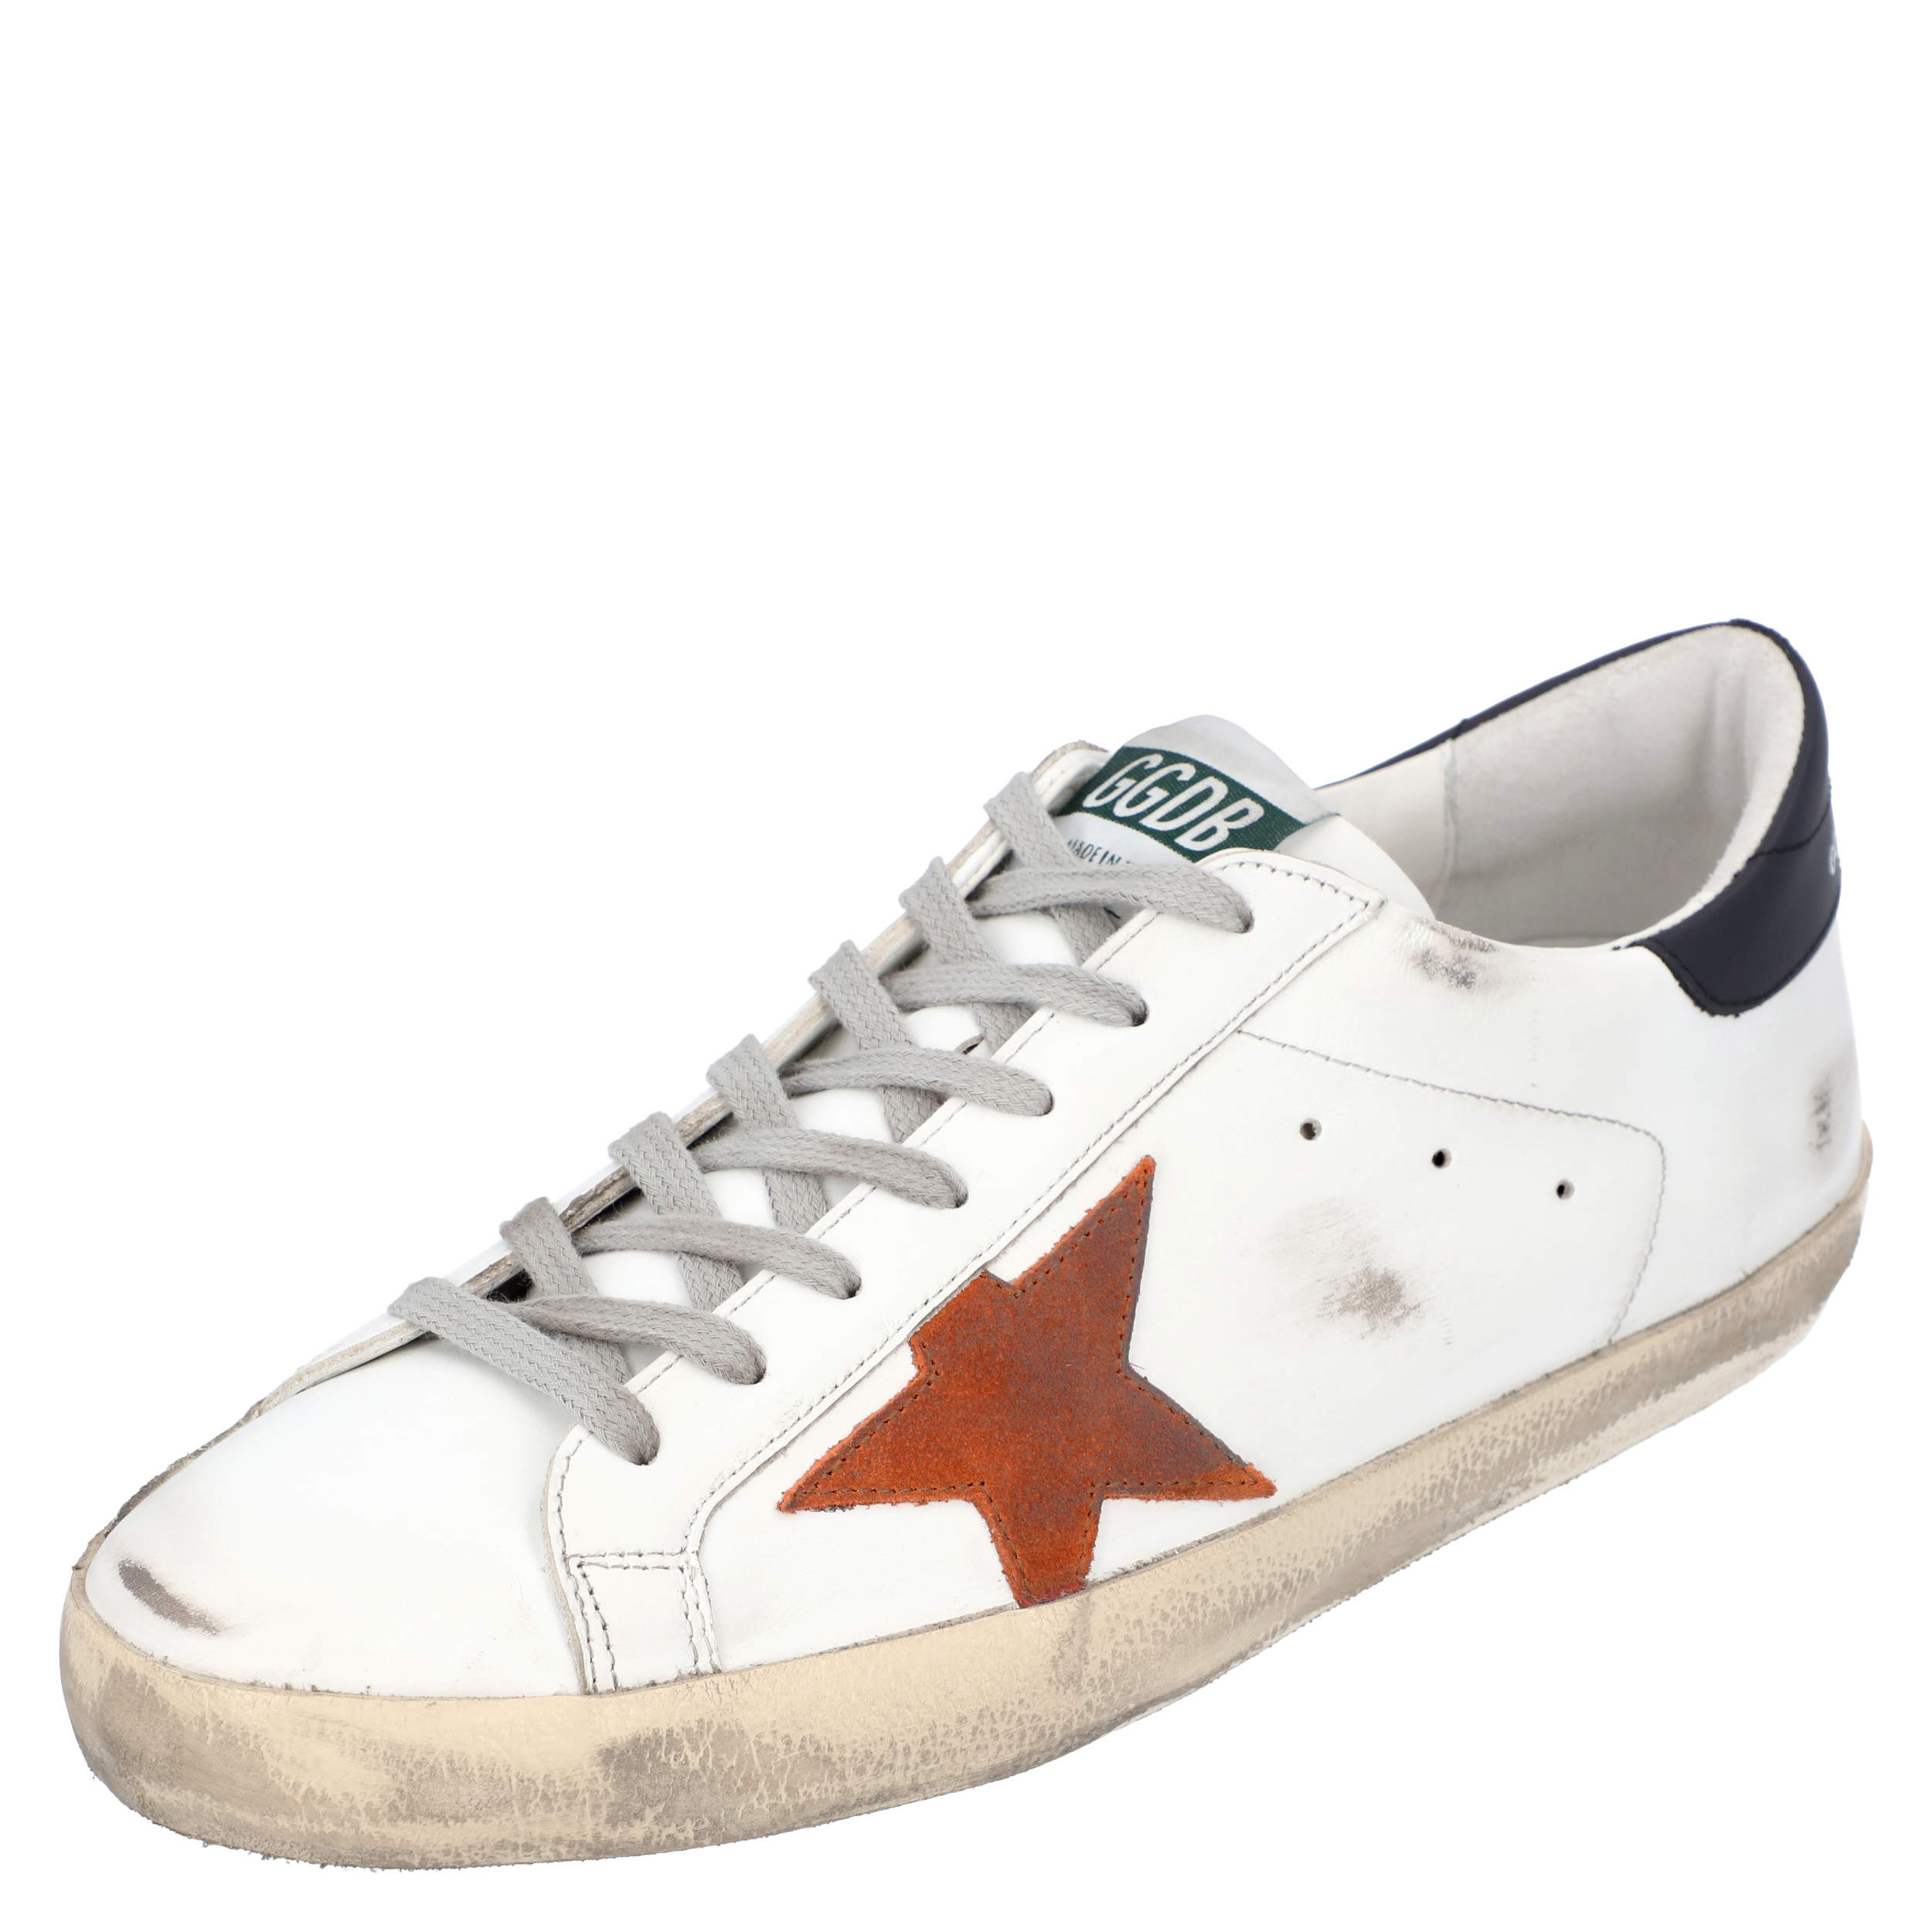 Golden Goose White / Black / Red Leather Superstar Sneakers Size EU 43